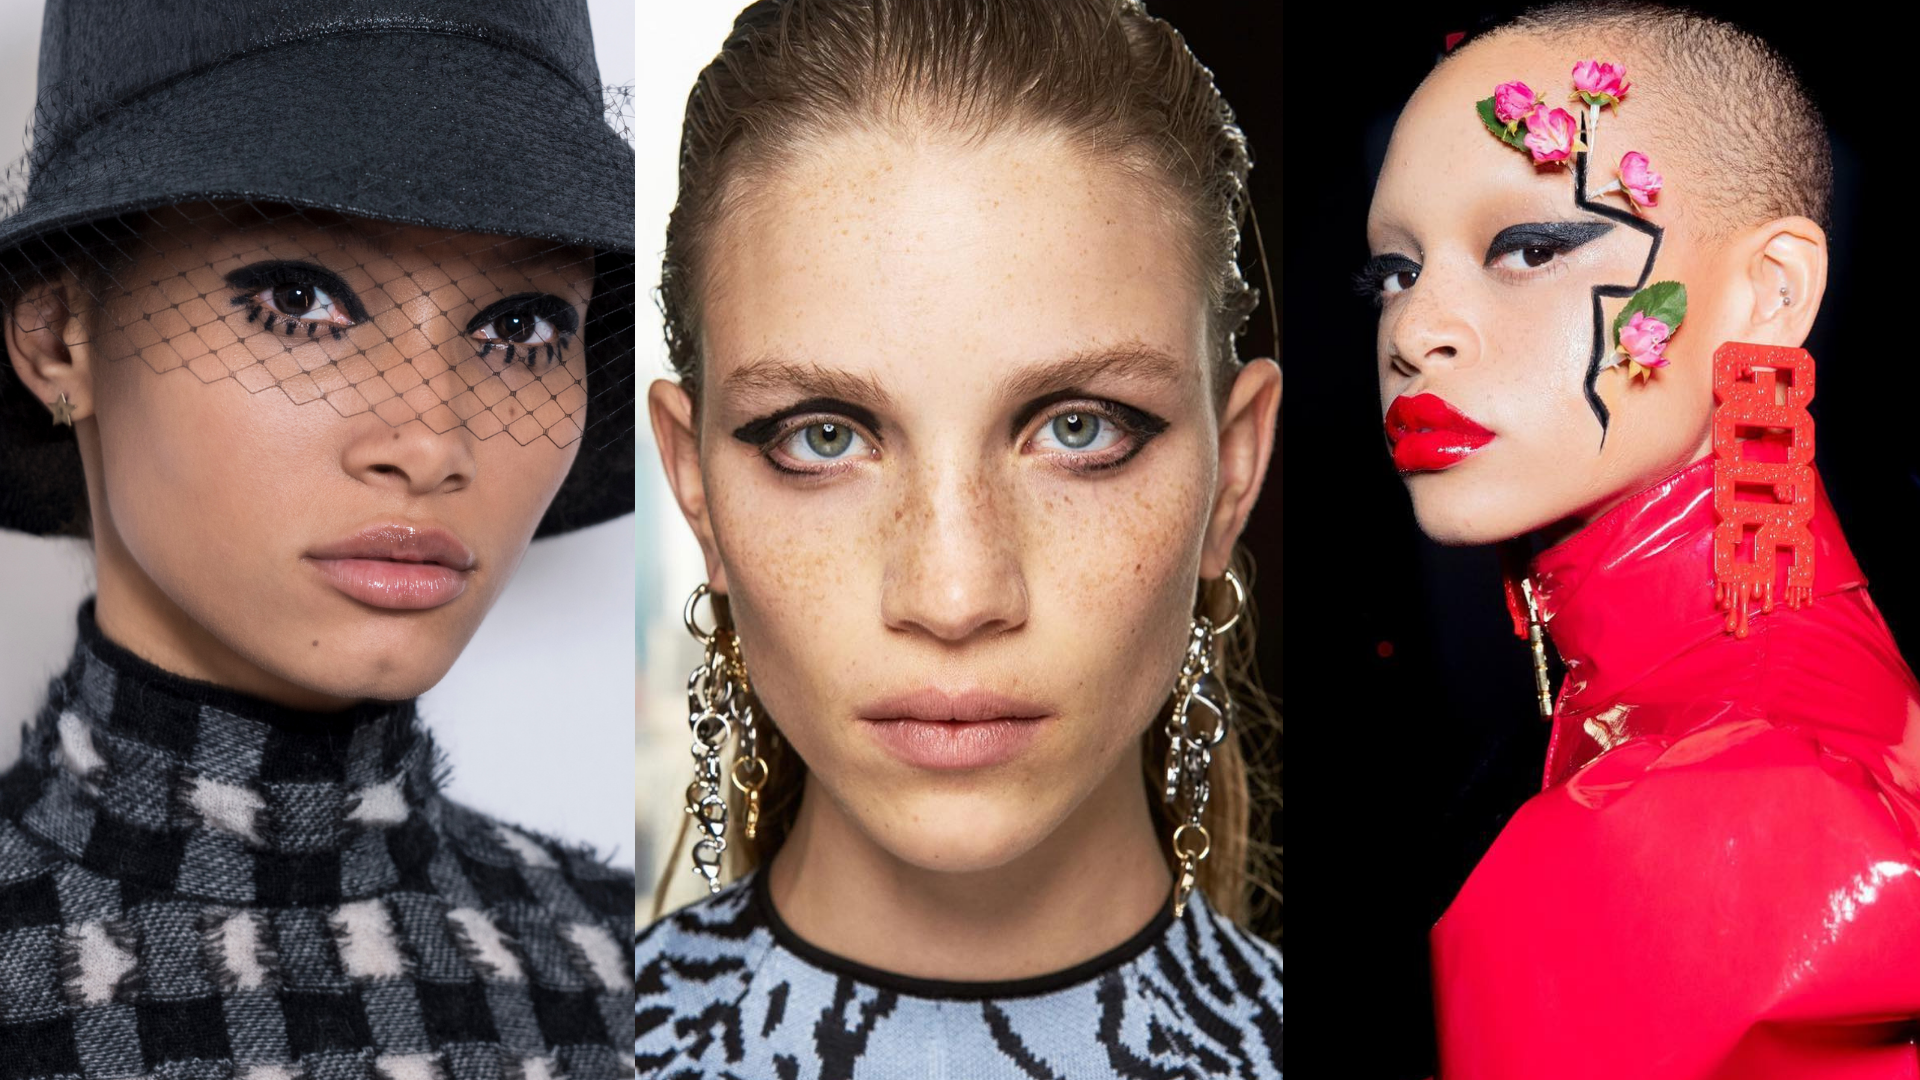 Autumn Makeup Trends For 2019 - Best AW19 Beauty Trends